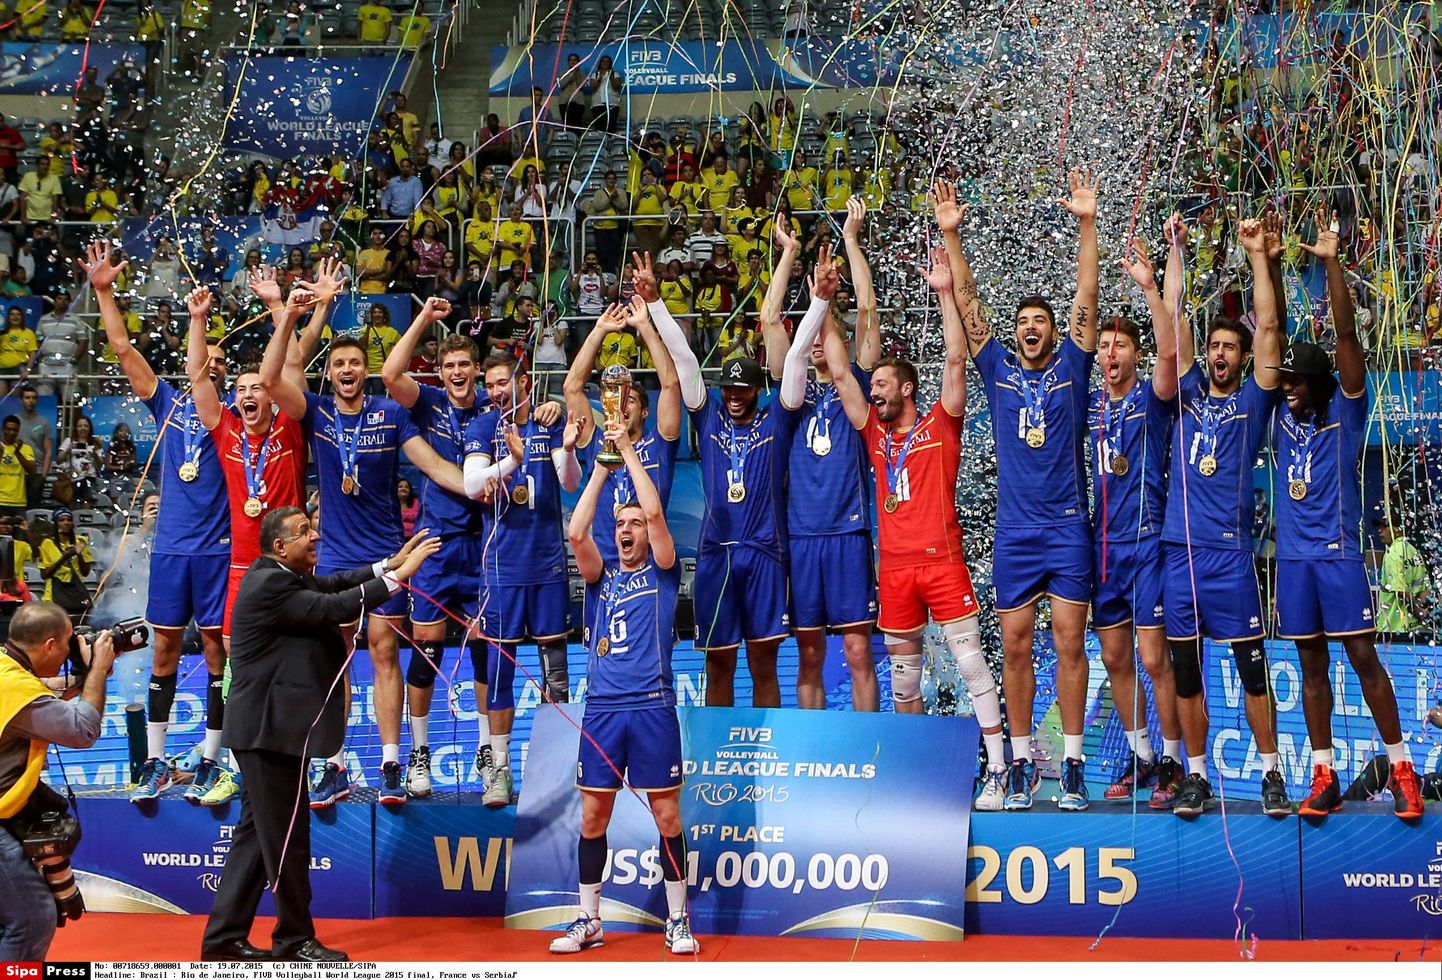 France's players celebrate after winning the champion of the FIVB Volleyball World League 2015 final at the Maracanazinho Gymnasium in Rio de Janeiro, Brazil, July 19, 2015. 
France won the Champion 3-0. (Xinhua/Xu Zijian)/CHINENOUVELLE_1907.B.001/Credit:CHINE NOUVELLE/SIPA/1507201019